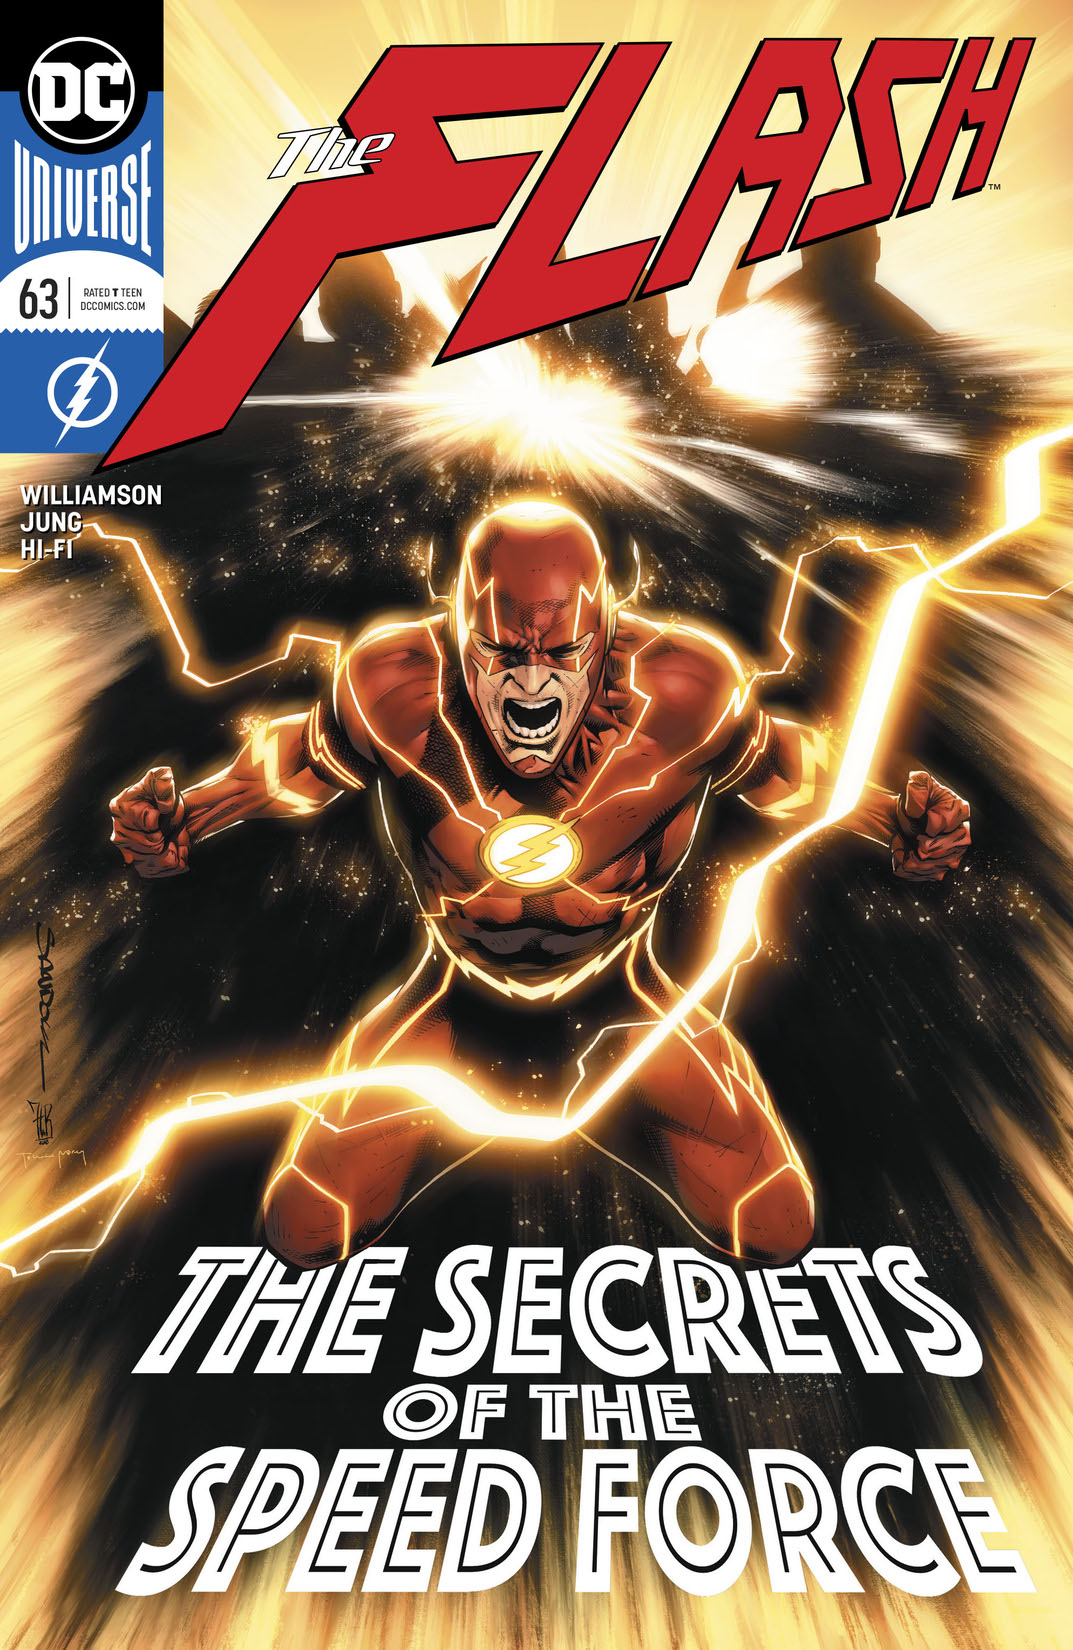 The Flash (2016-) #63 preview images